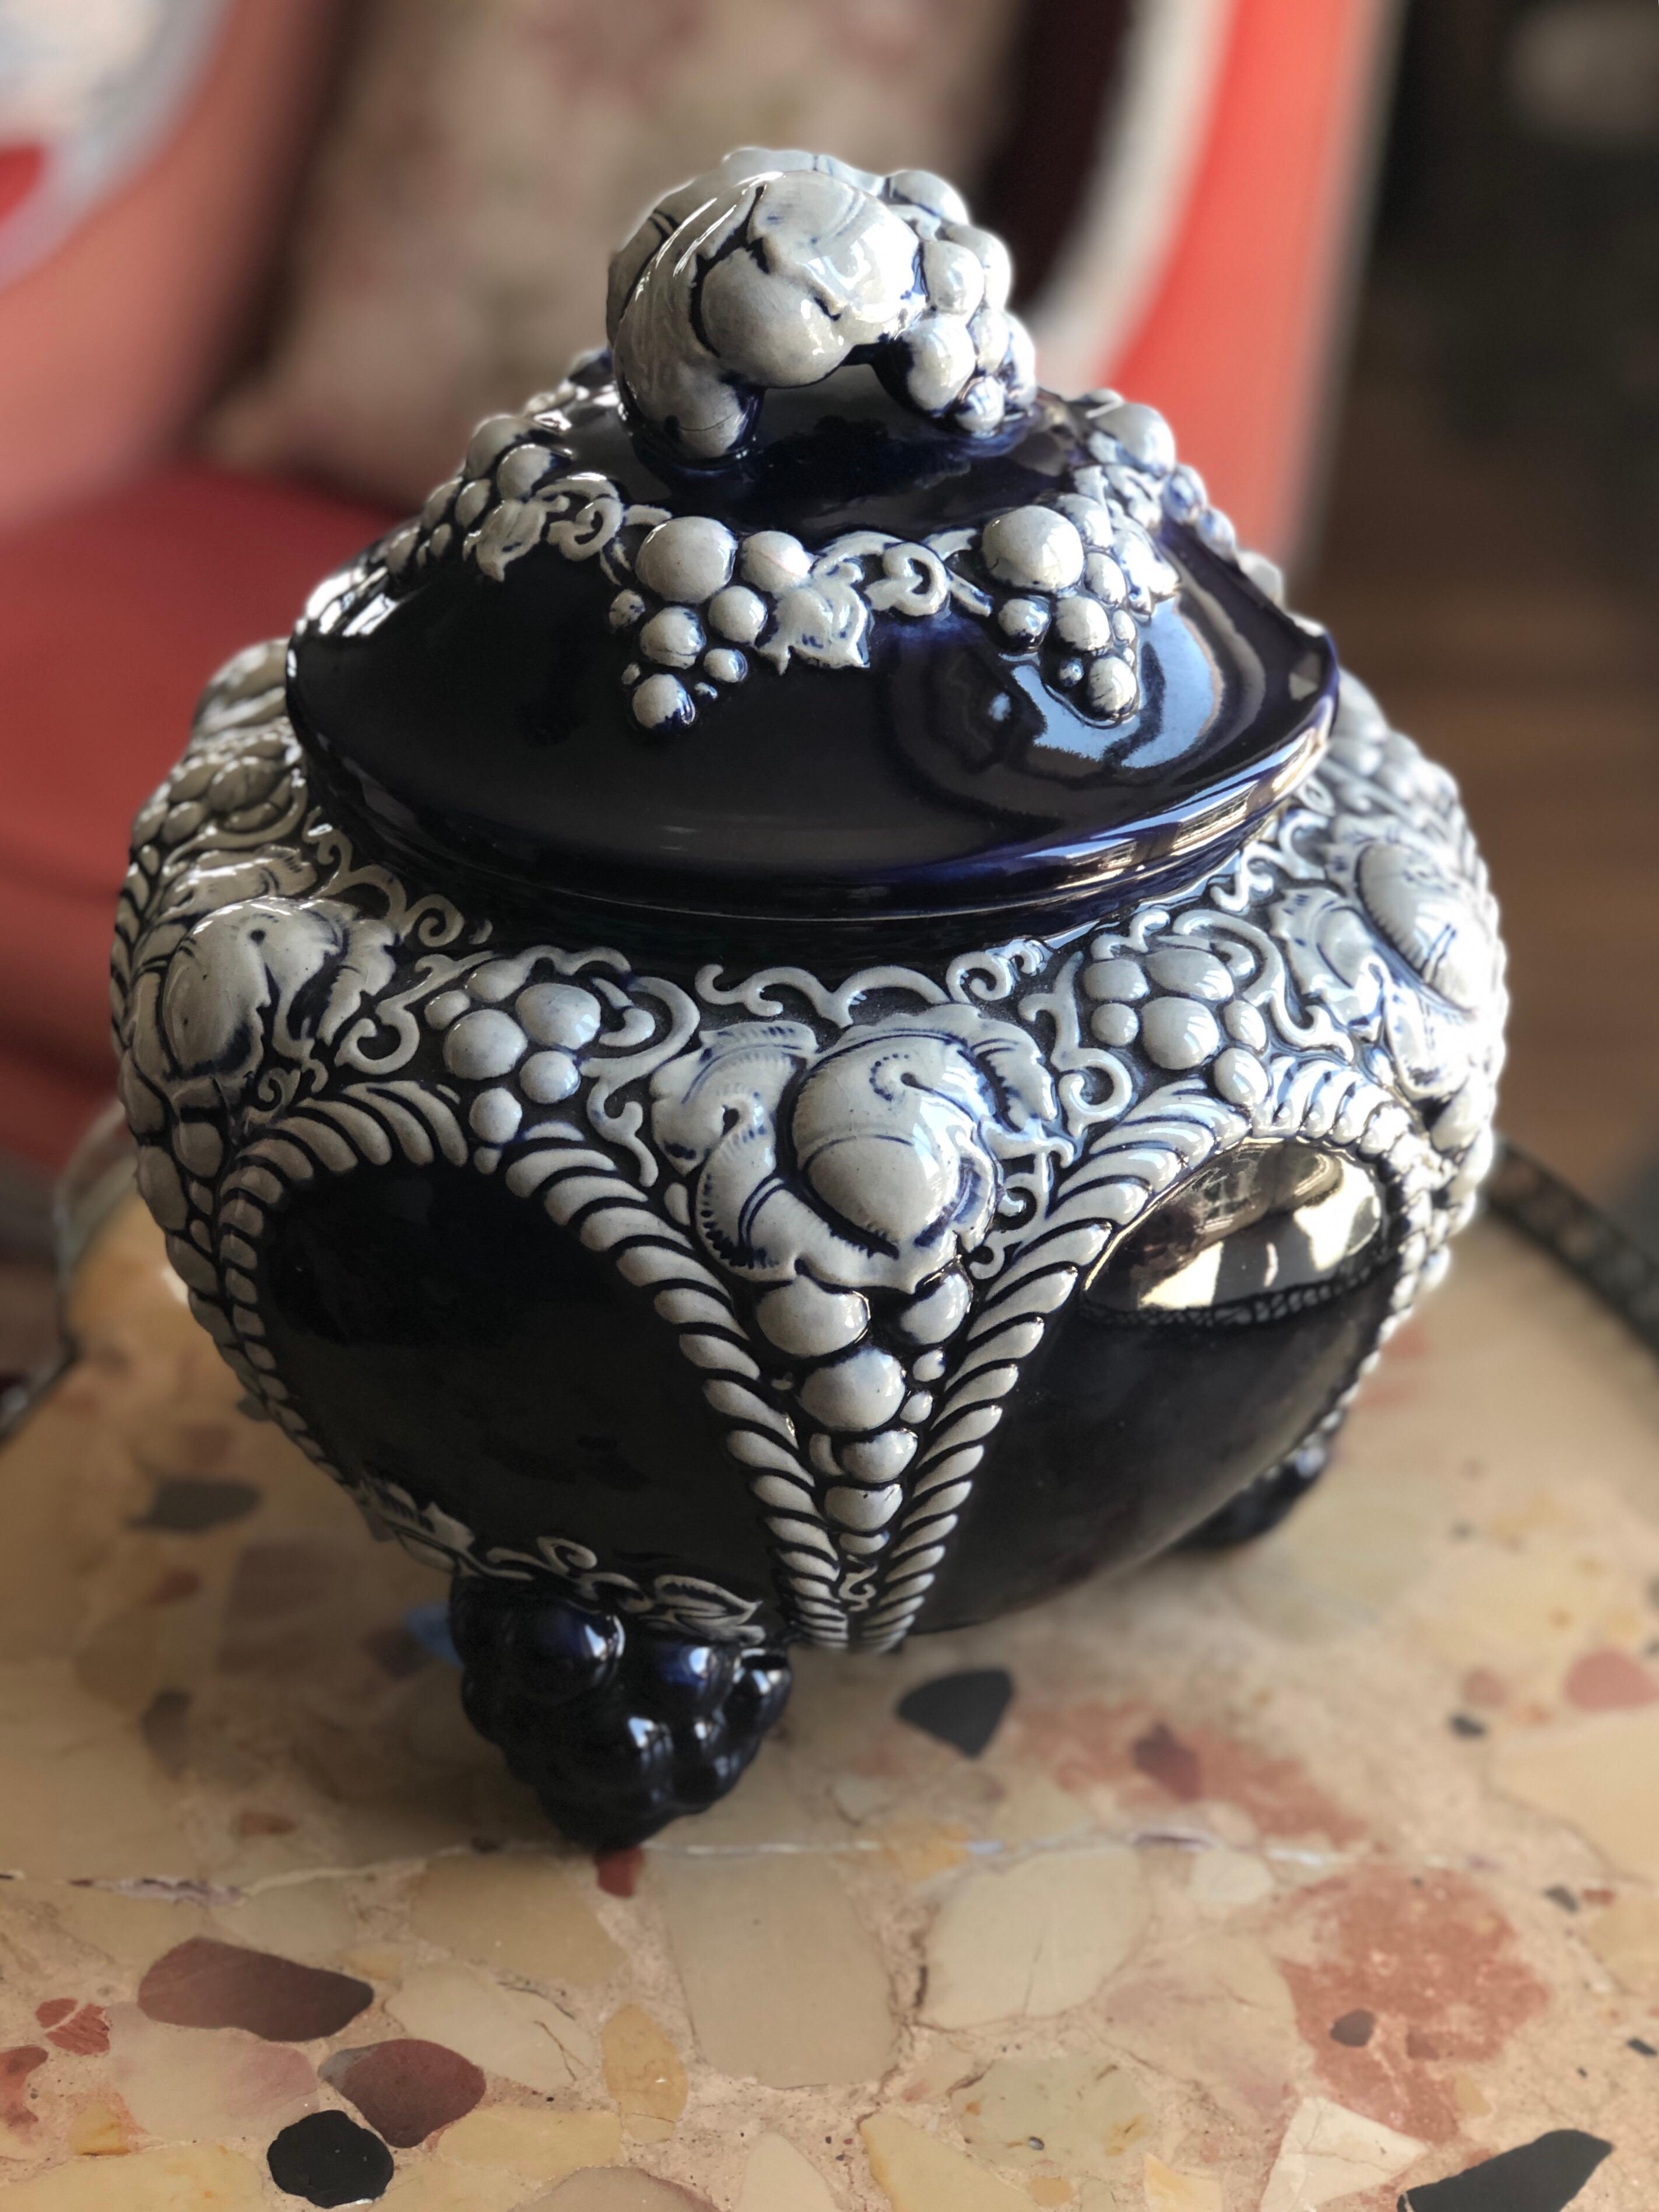 Rare handmade ceramic soup tureen standing on three legs (there is a small missing piece at one of them). The piece is richly decorated with grapes and leafs especially on the top of the tureen. It is glazed in dark blue and white and there is a